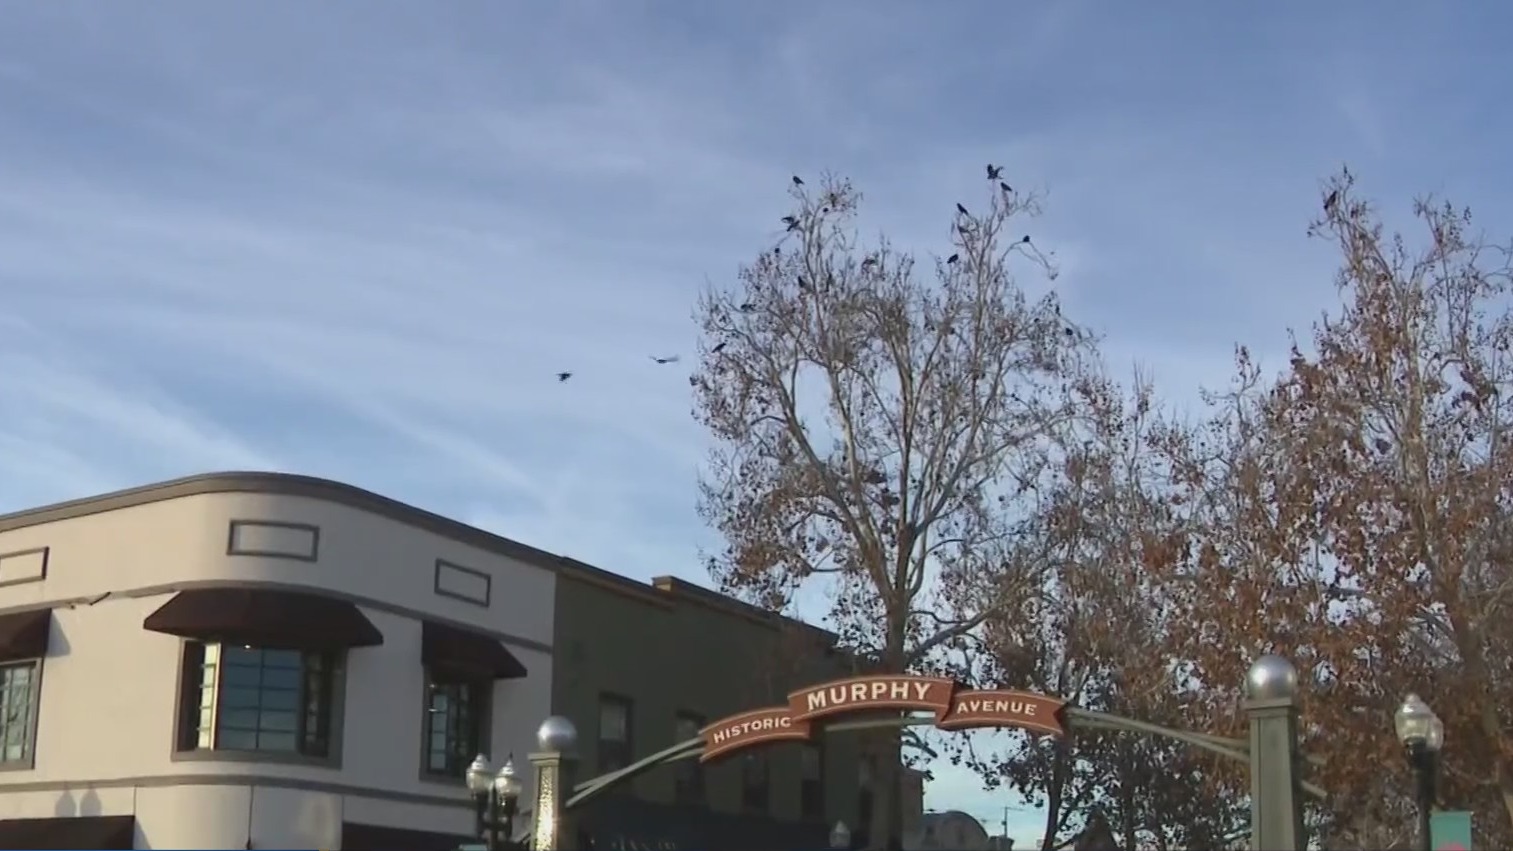 Crows perched above historic Murphy Avenue in downtown Sunnyvale. (CBS)